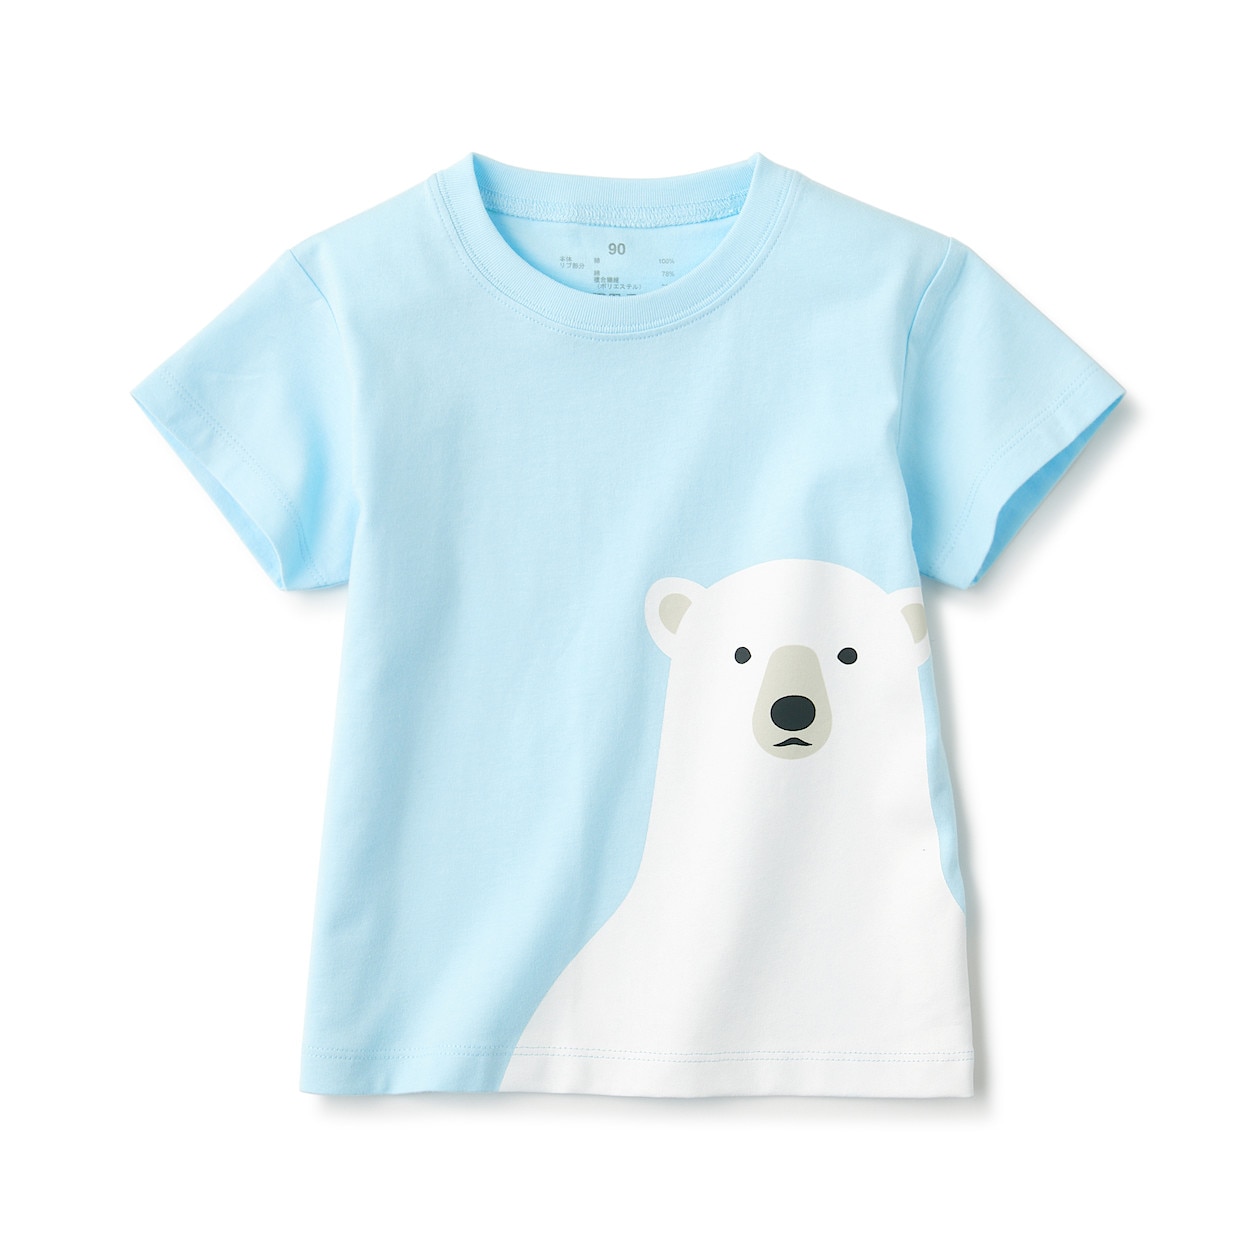 Indian Cotton Jersey Printed T-Shirt (1-4 years)